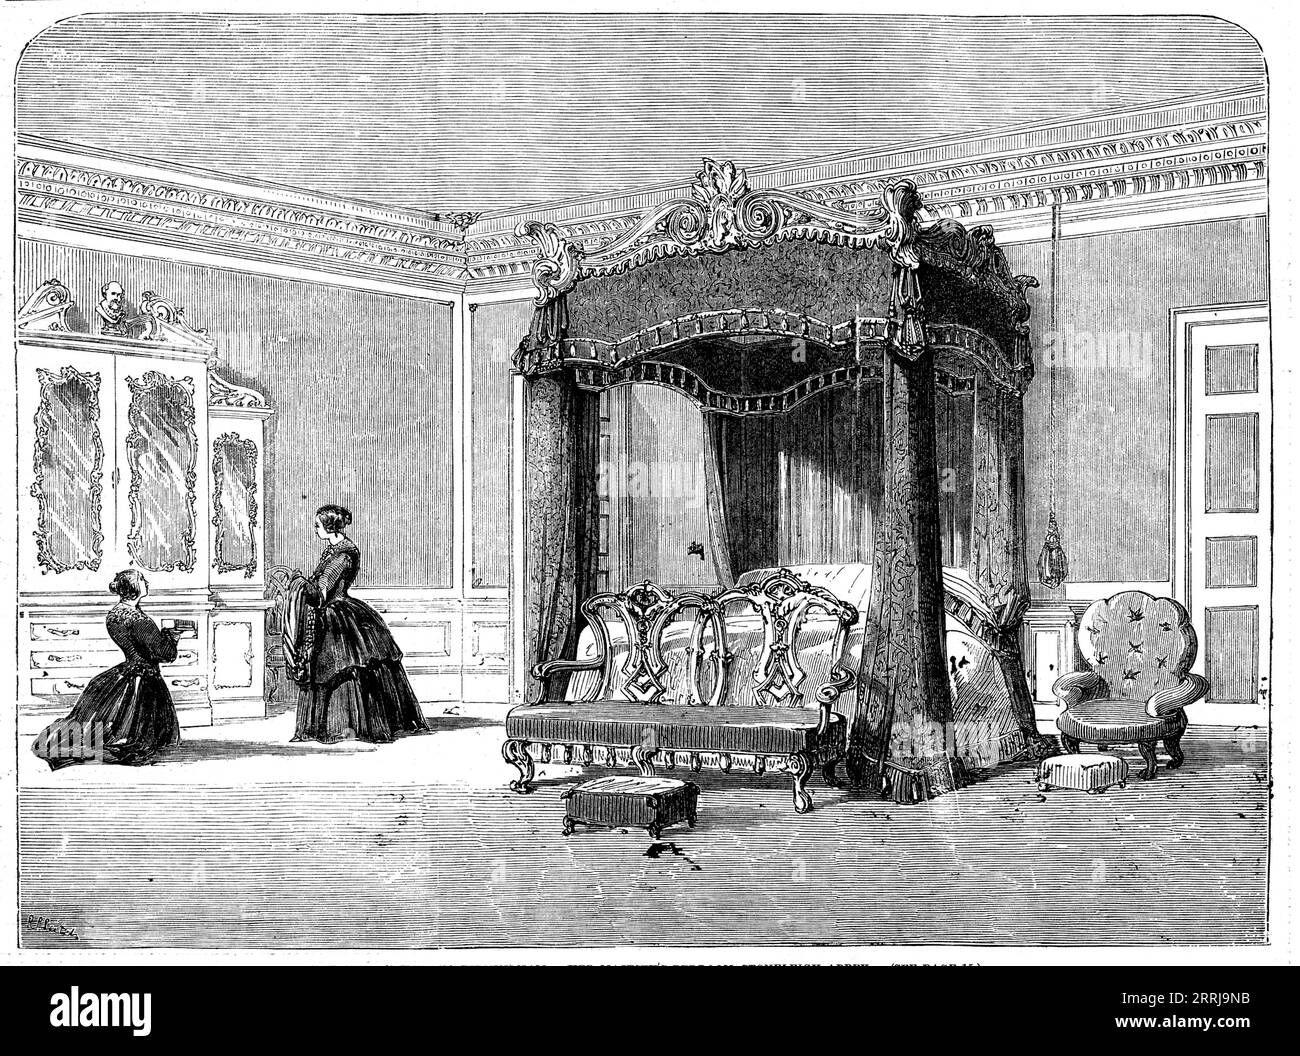 The Queen's Visit to Birmingham - Her Majesty's Bedroom, Stoneleigh Abbey, 1858. 'Her Majesty honoured Lord Leigh by sleeping at his family mansion, Stoneleigh Abbey, on her way to Birmingham to open Aston Park, and also on her return thence the following day. The rooms set apart for her Majesty at the Abbey, comprising the whole of the first floor, were entirely redecorated and newly furnished for the Royal visit...The decorations and furniture of the other apartments appropriated to the use of her Majesty and suite displayed the same exquisite taste. Messrs. Moxon, of London and Edinburgh, h Stock Photo